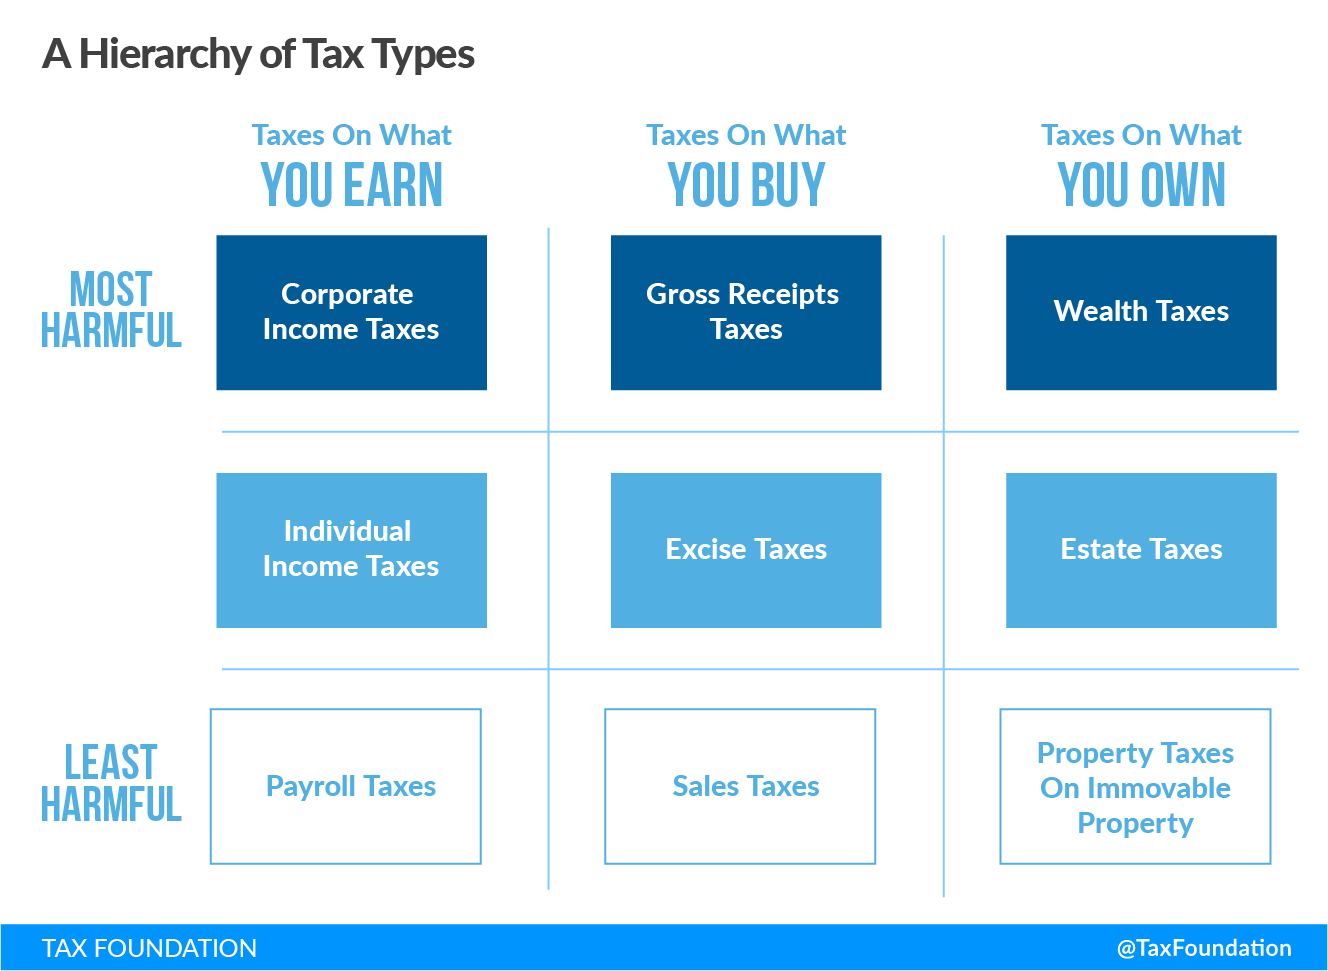 A Hierarchy of Tax Types, What are the basic economic impact of taxes? tax economic impact Basic tax types